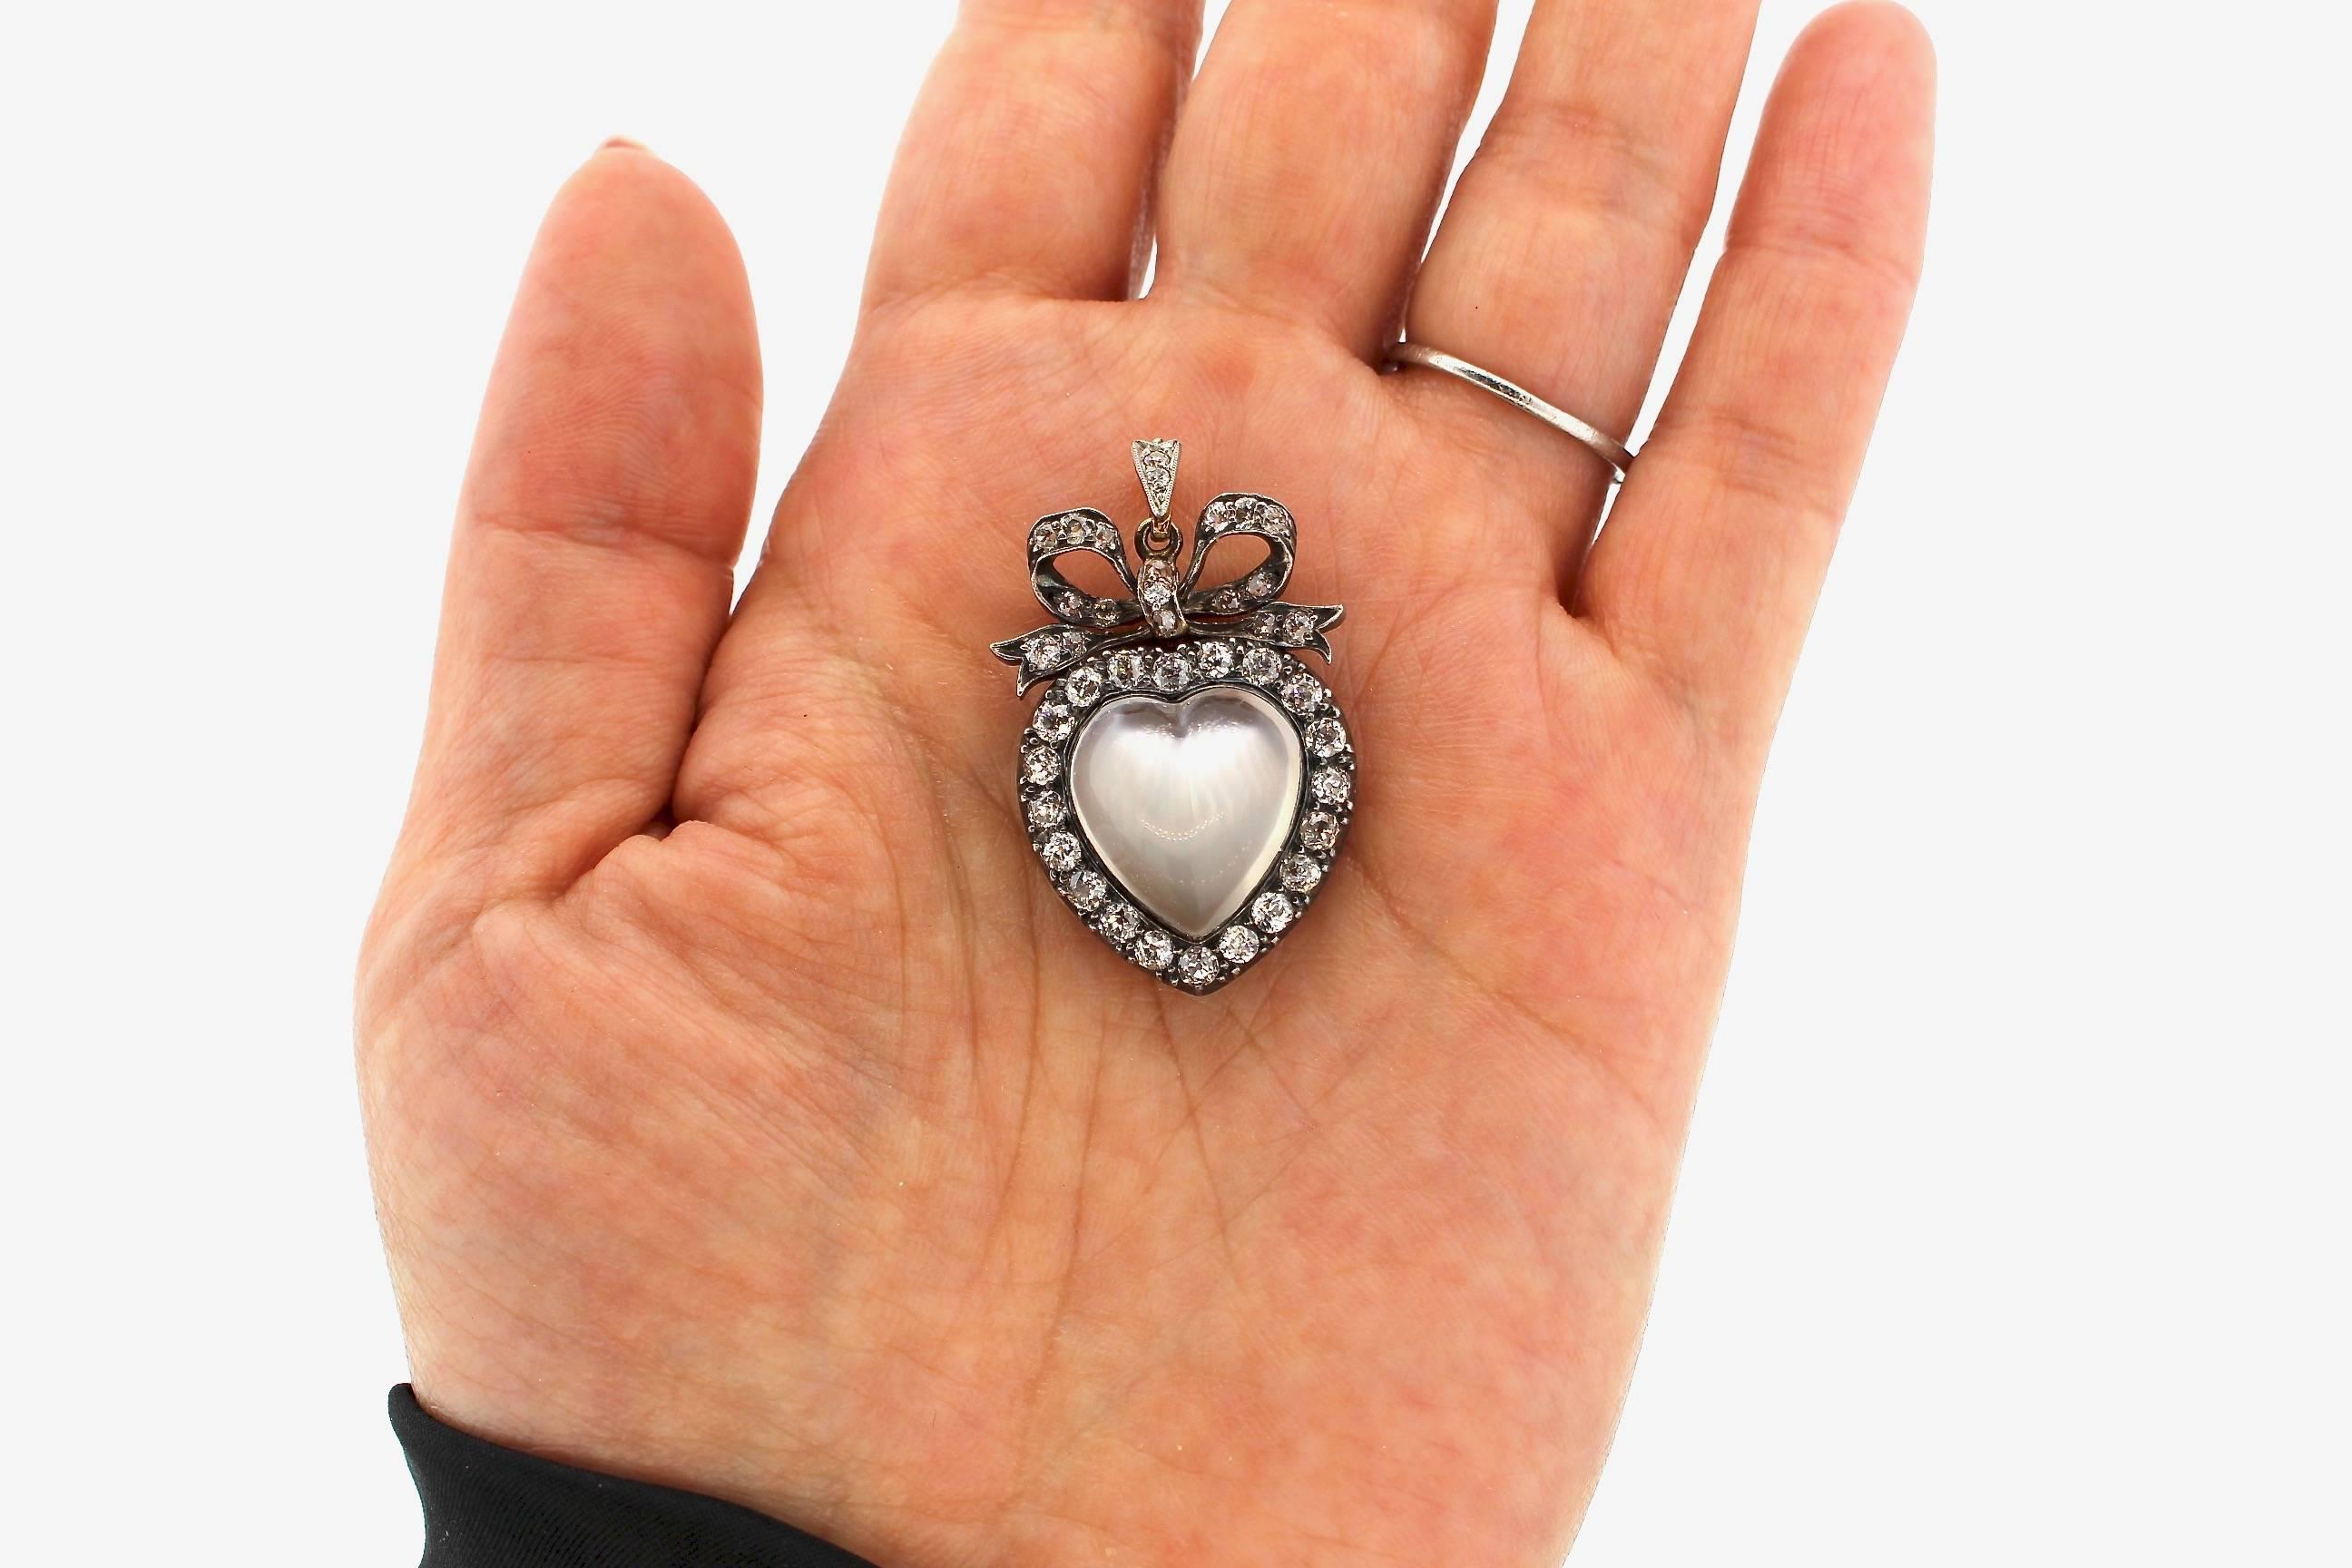 A sentimental 19th Century diamond and moonstone heart pendant set in silver topped gold.  The large luminous heart shaped moonstone is surrounded by old mine cut diamonds.  There are 35 diamonds weighing a total of approximately 2.65 cts of